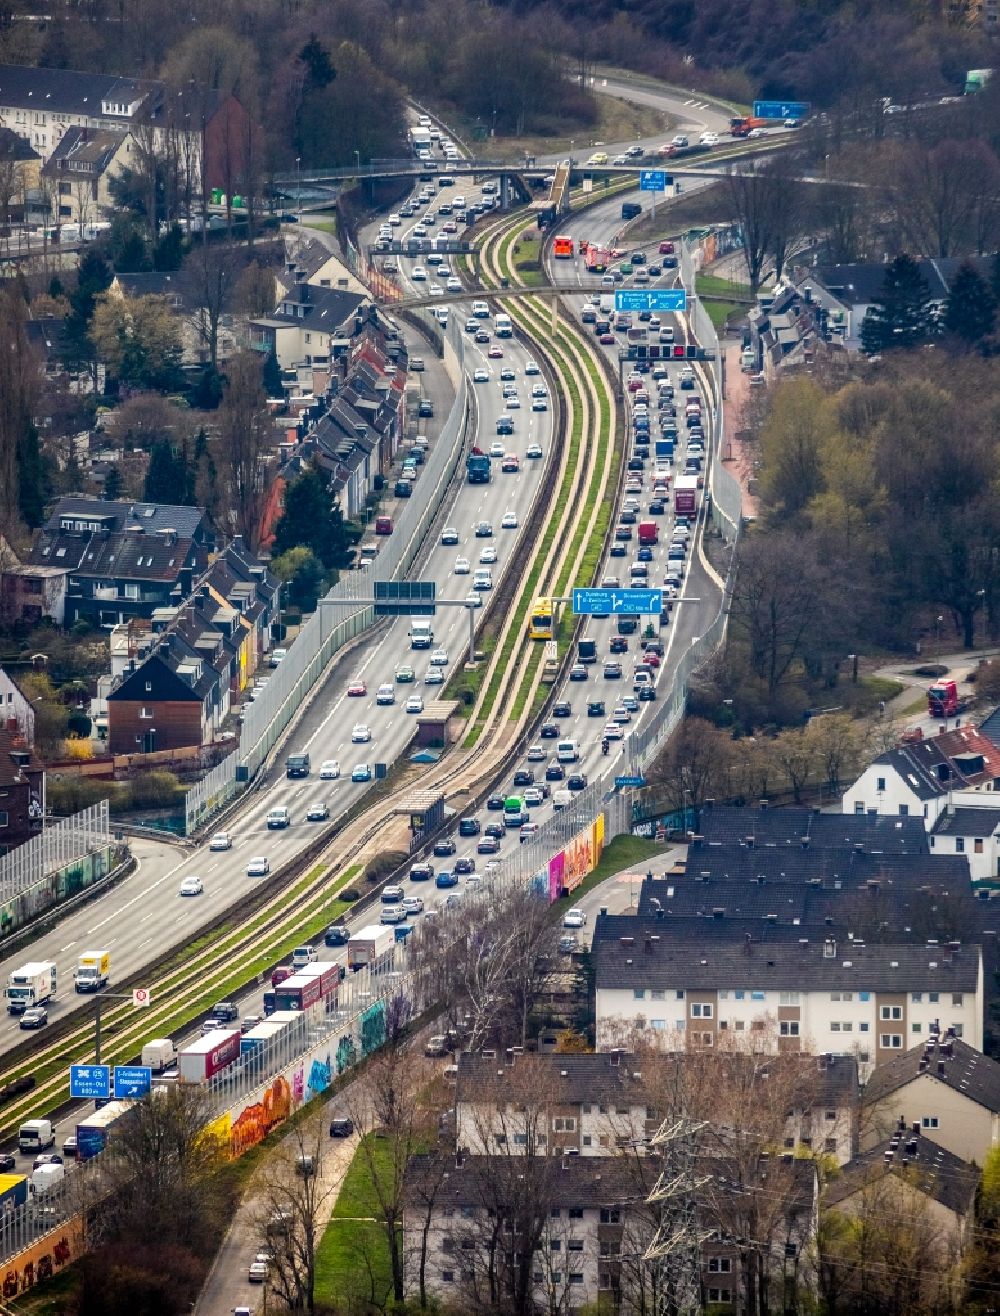 Essen from above - Highway congestion along the route of the lanes BAB A40 - A52 in the district Frillendorf in Essen in the state North Rhine-Westphalia, Germany